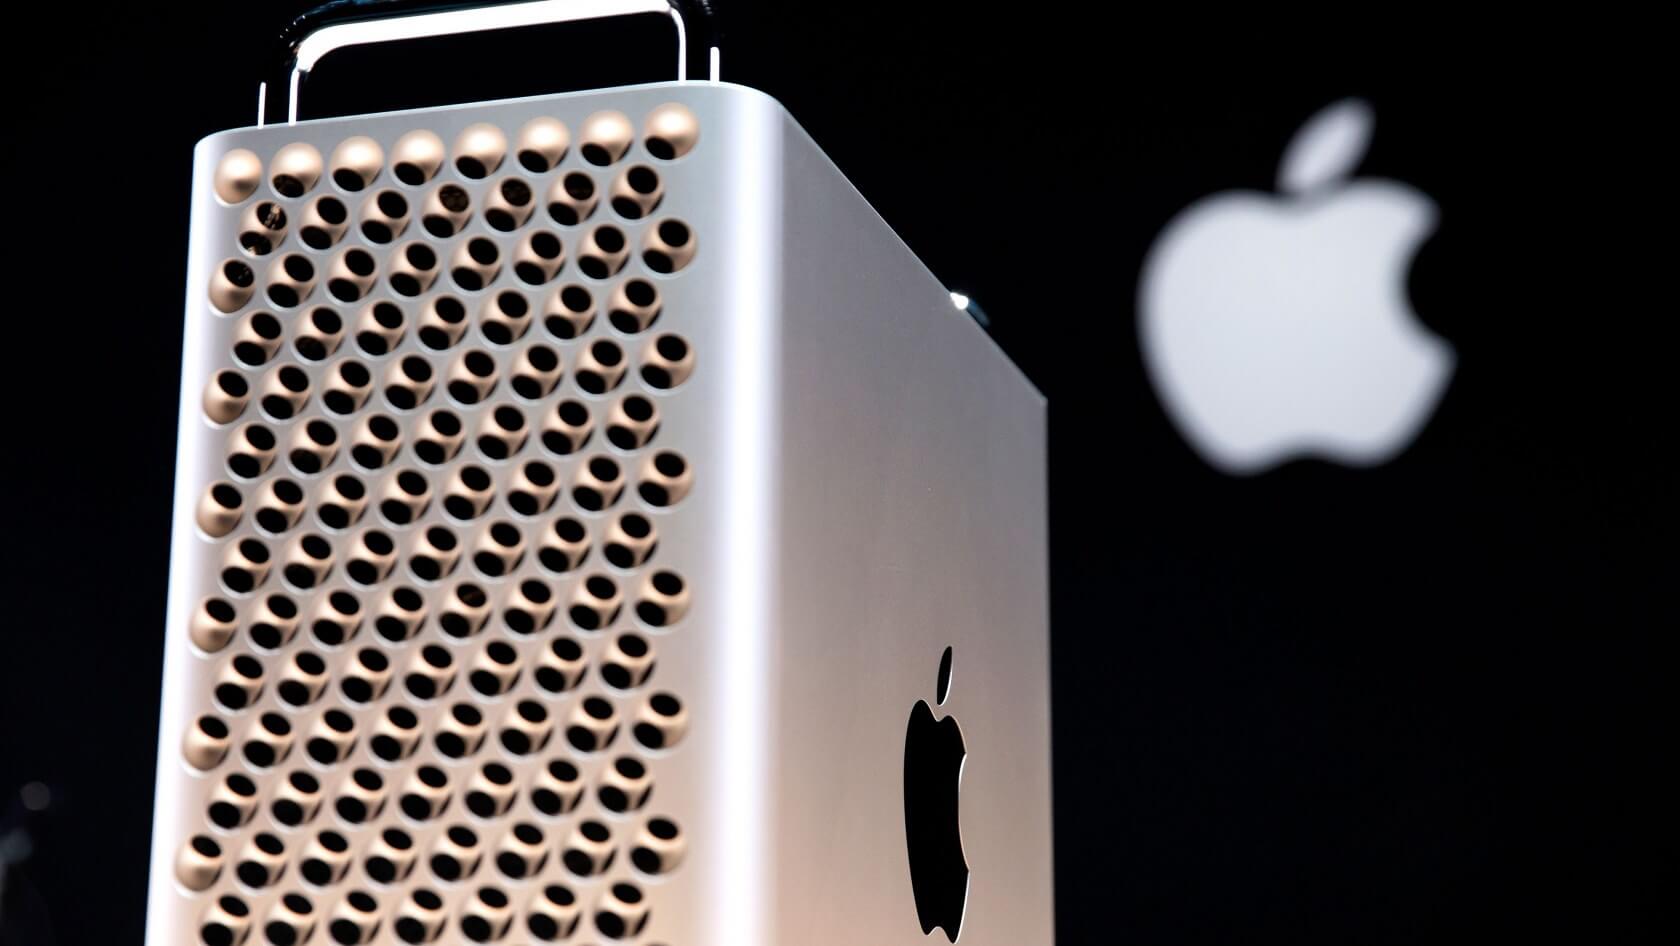 Analyst says the Mac Pro's Apple silicon processor won't be an M2